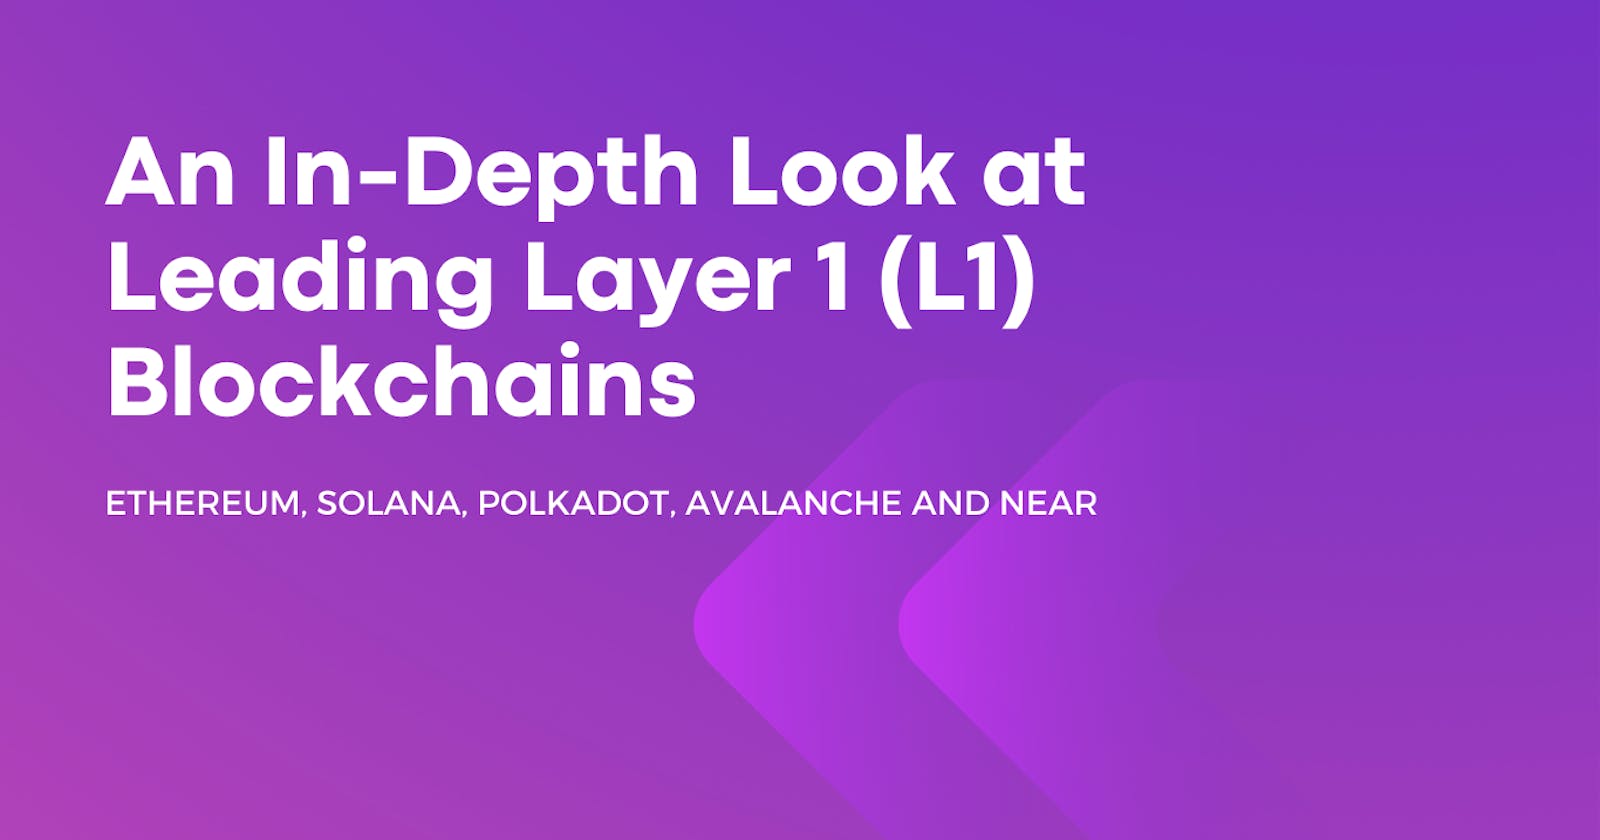 An In-Depth Look at Leading Layer 1 (L1) Blockchains